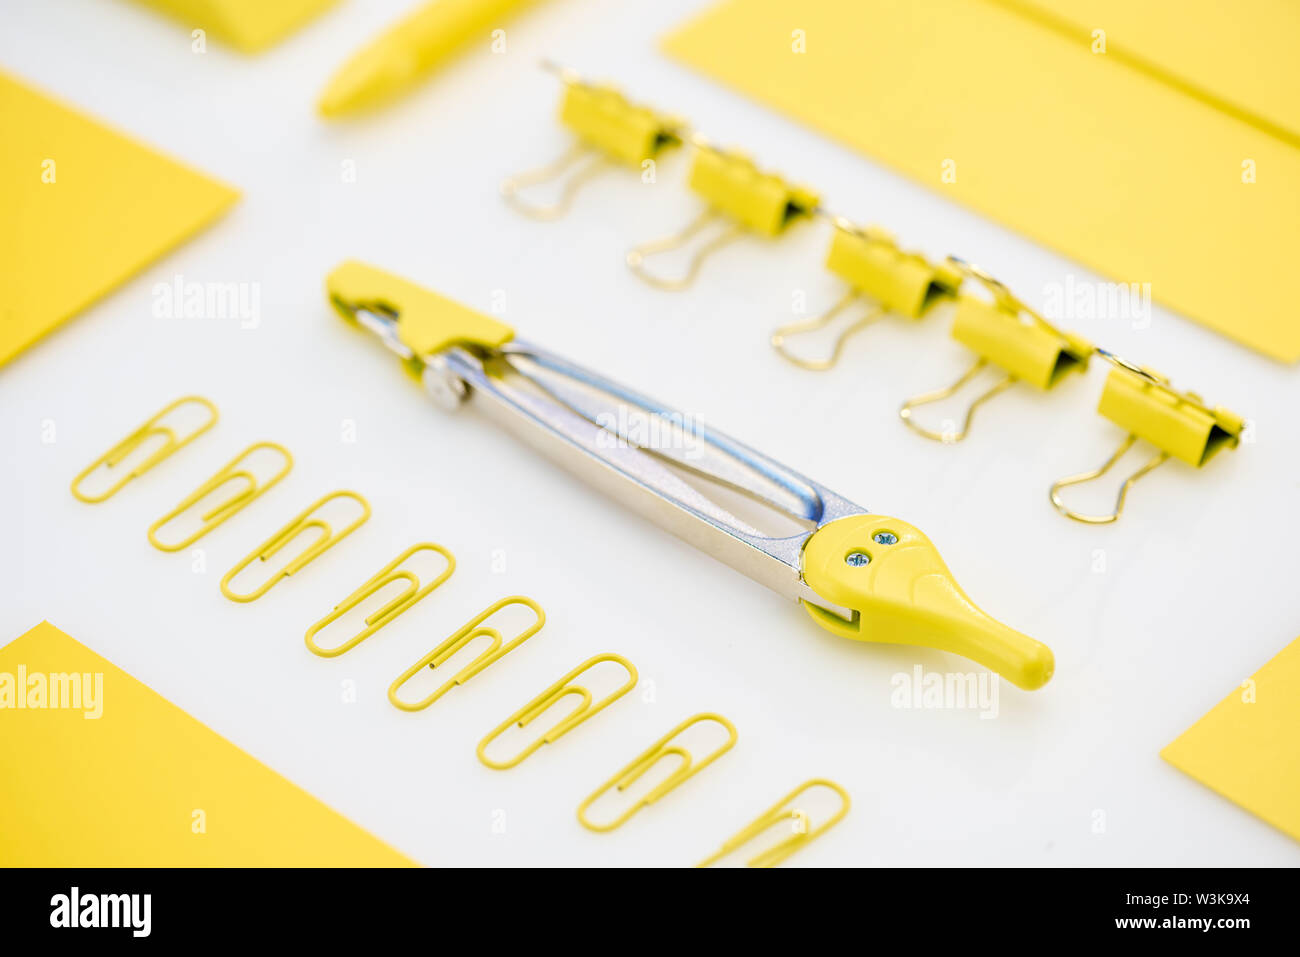 selective focus of yellow paper clips, compasses and envelope on white background Stock Photo